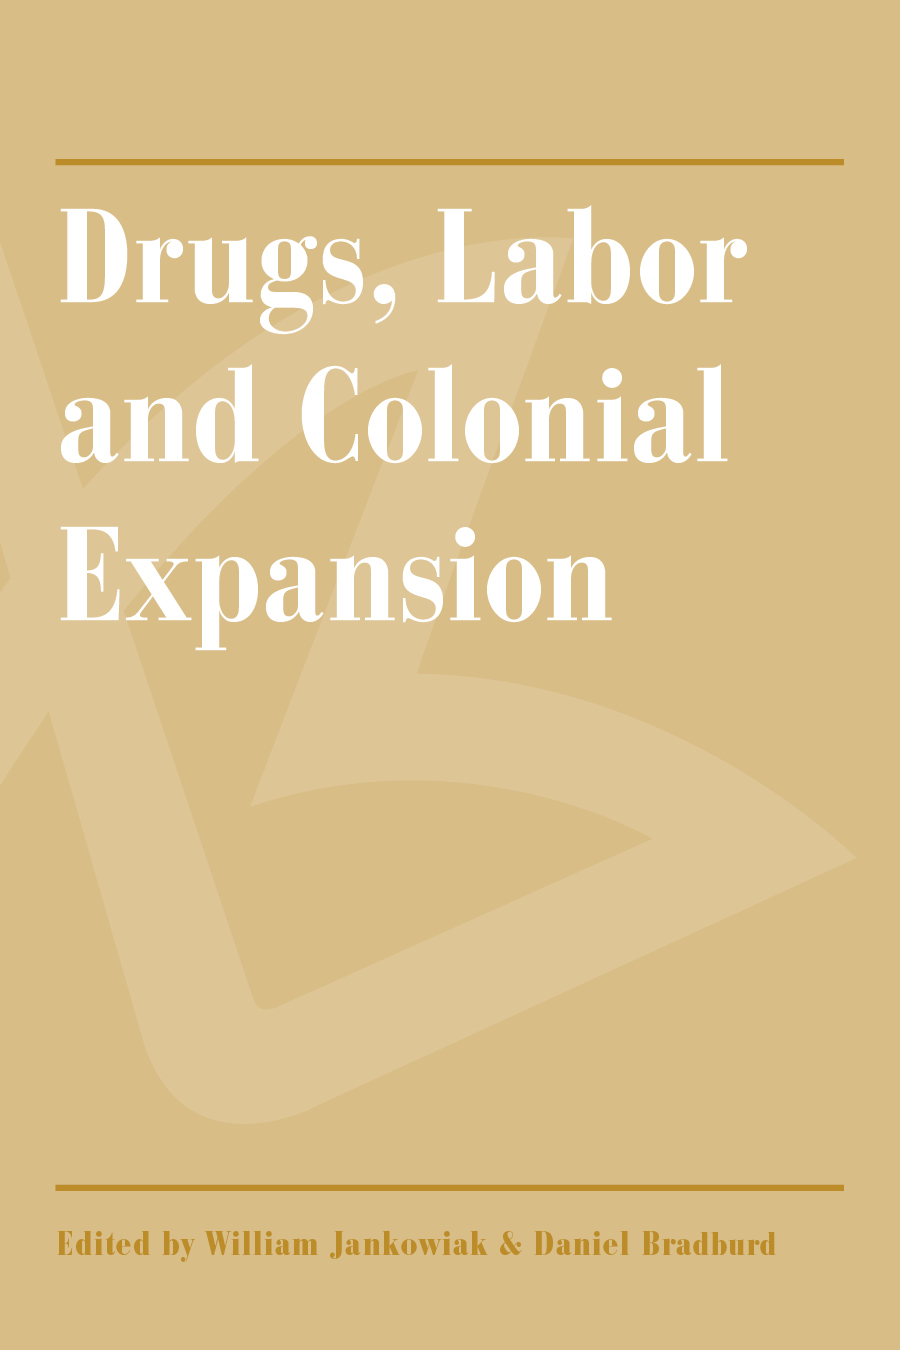 Drugs, Labor and Colonial Expansion